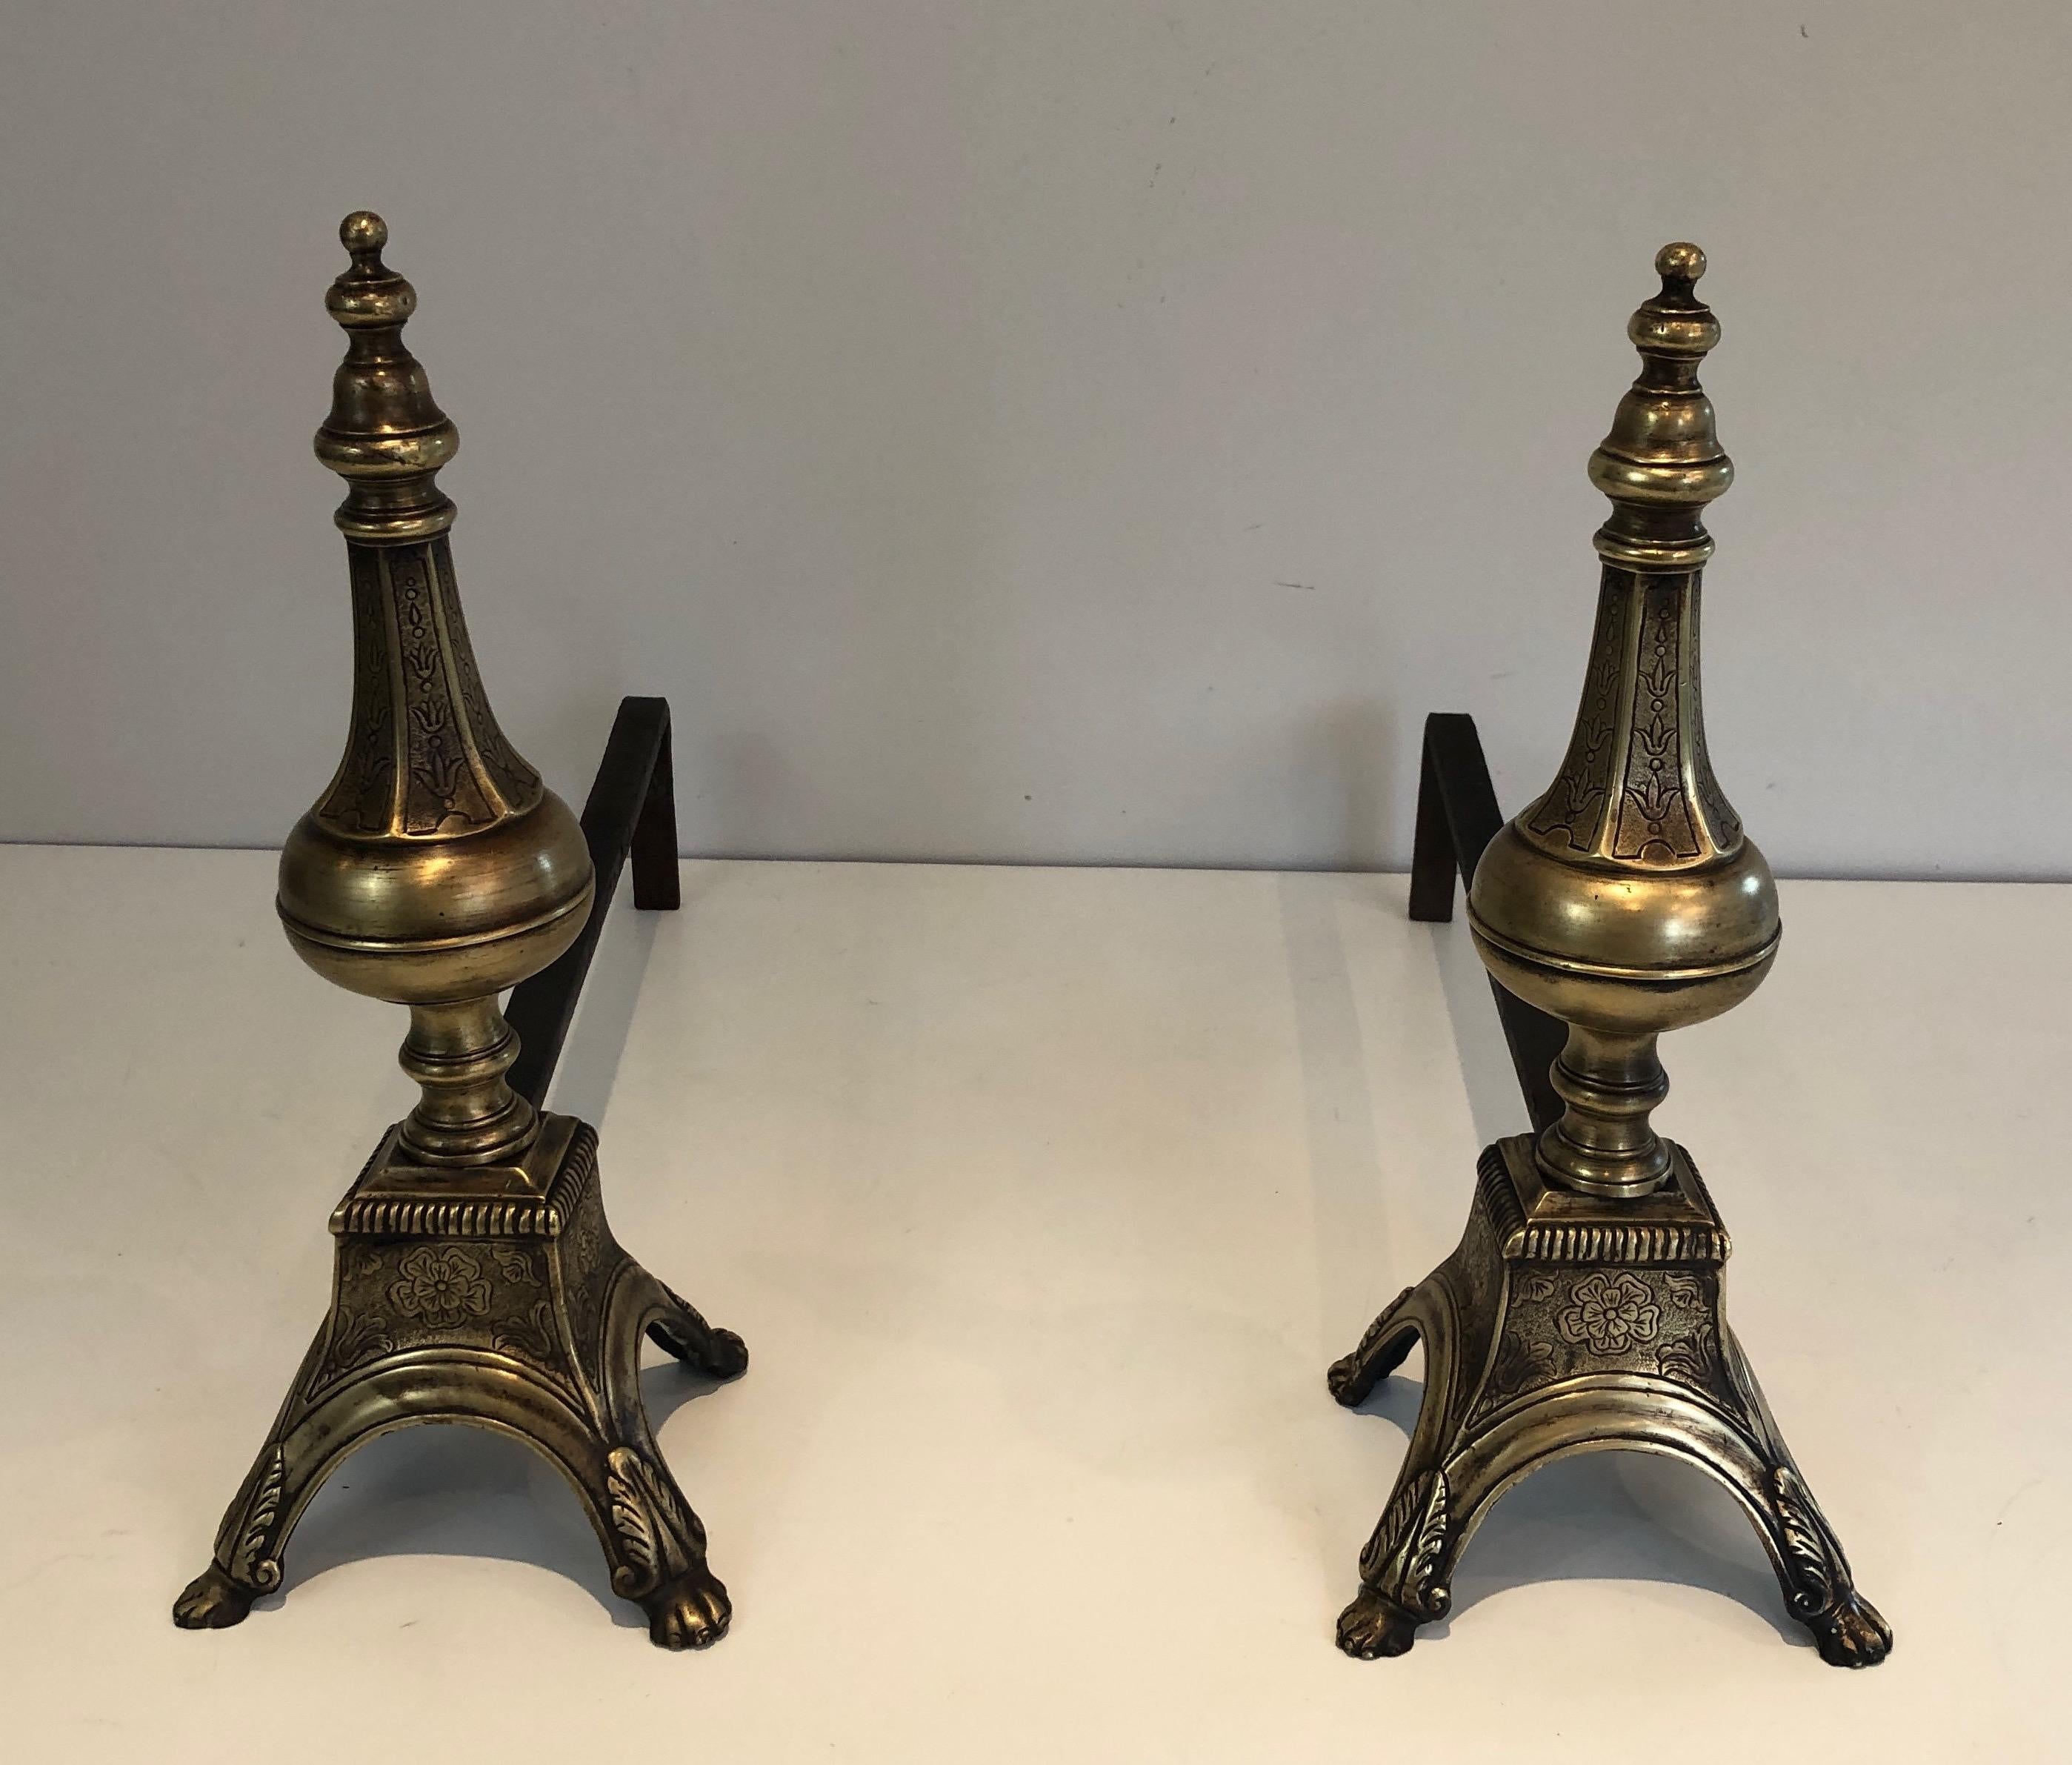 Rare Pair of Louis the 16th Style Bronze & Wrought Iron Andirons, 19th Century For Sale 3